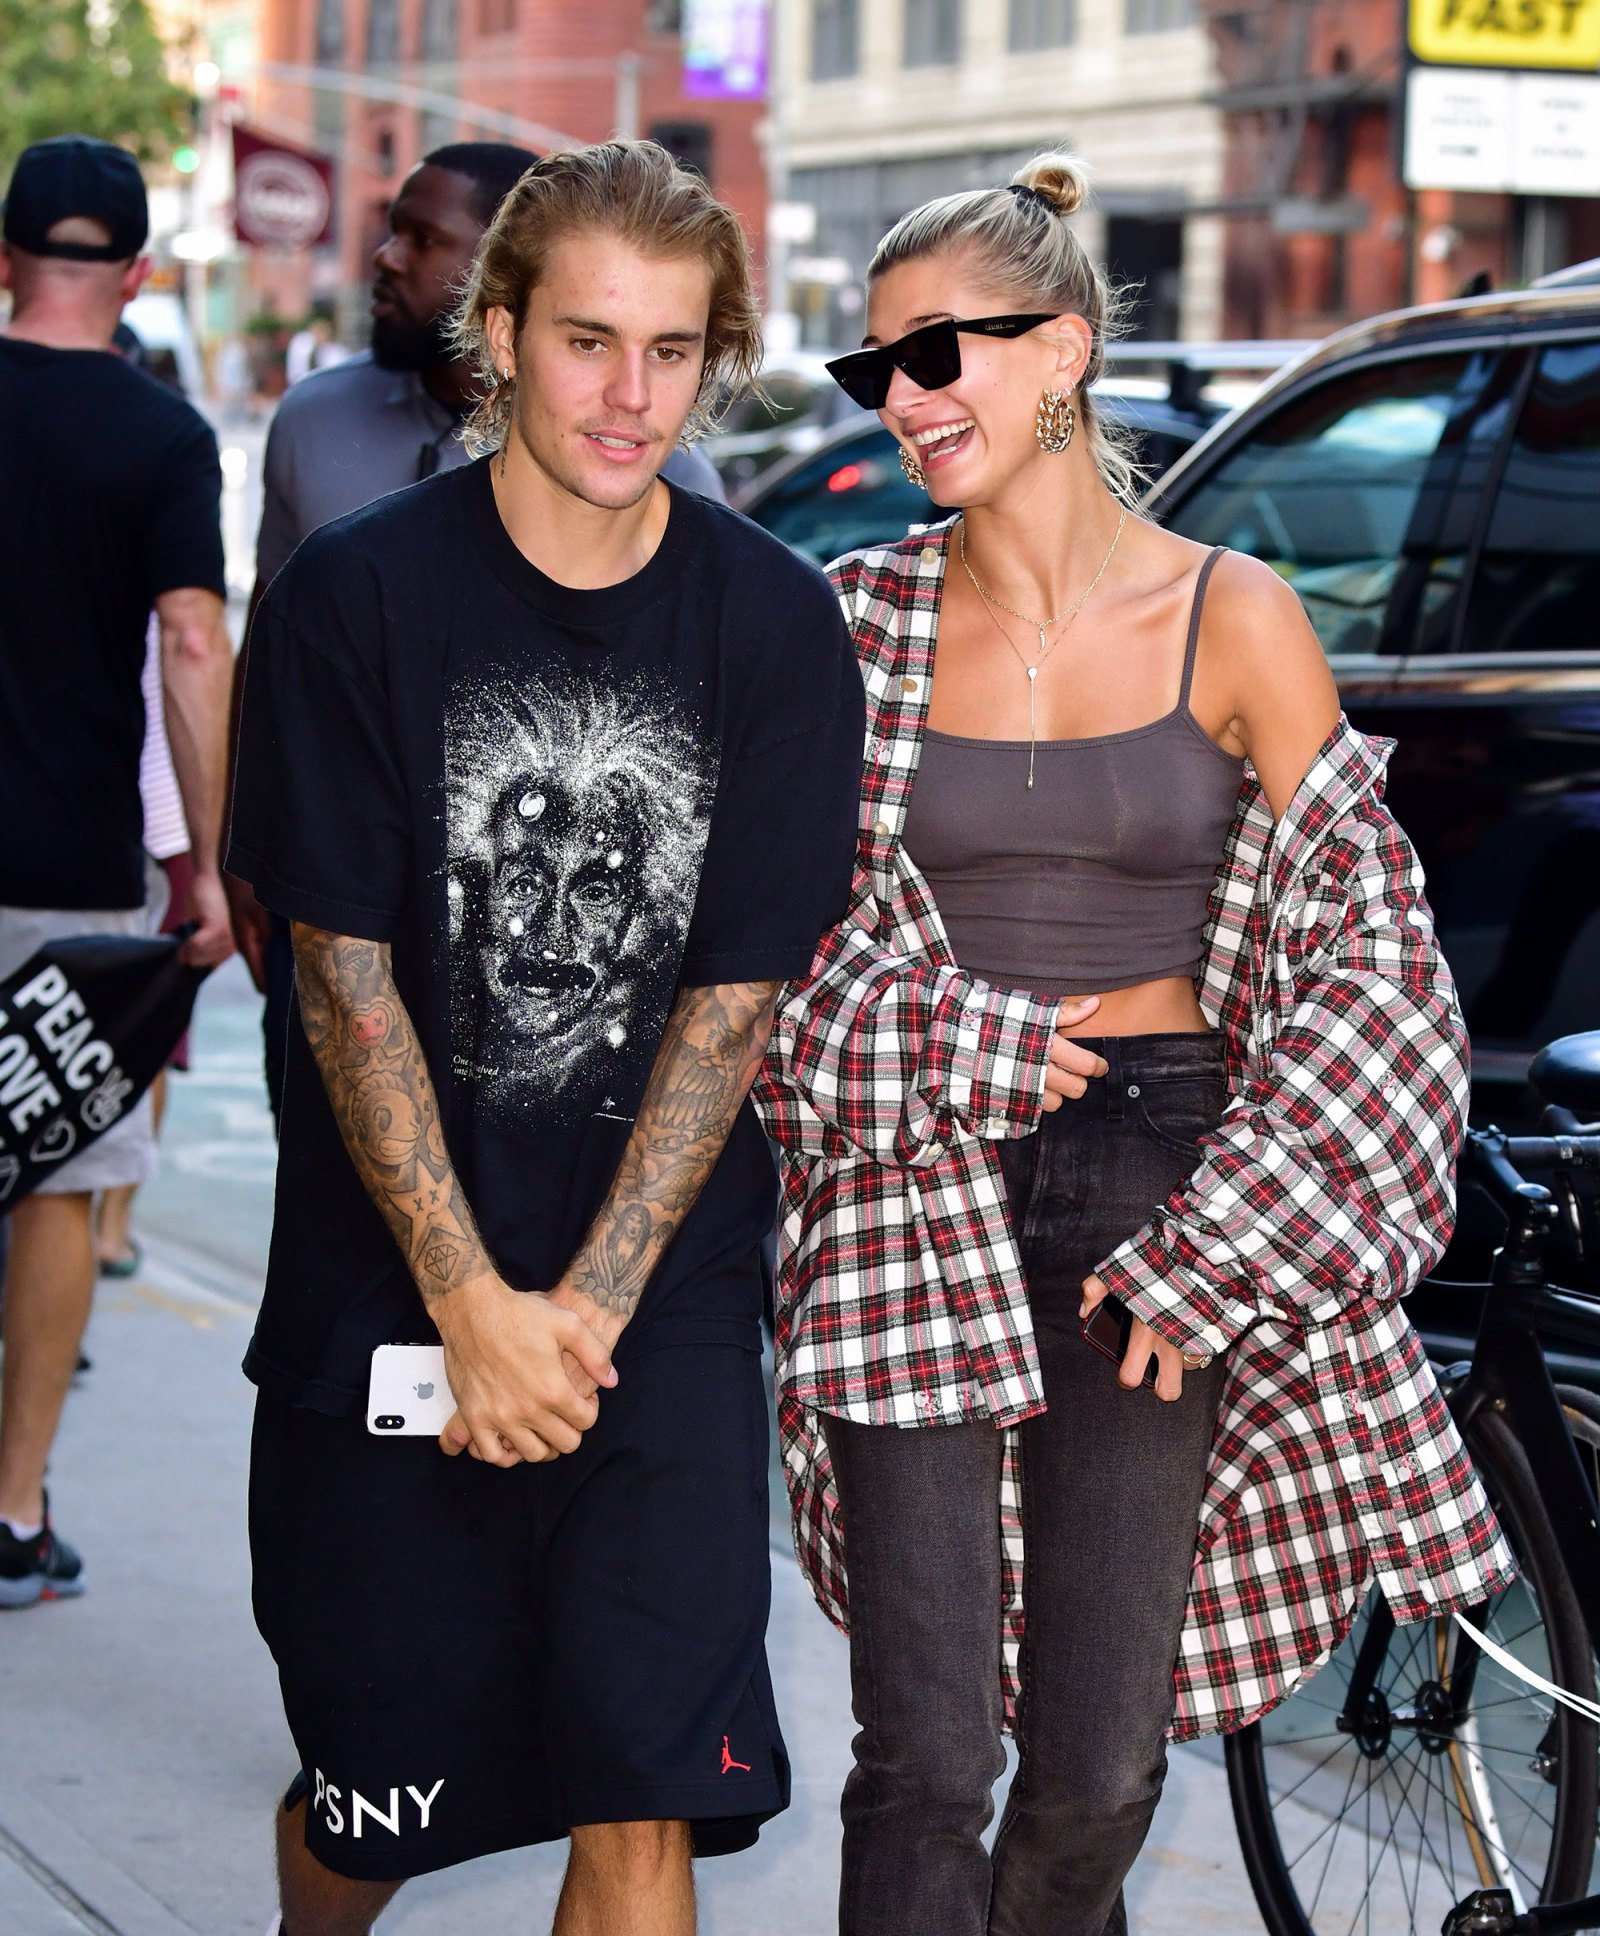 A Timeline of Justin Bieber and Hailey Baldwin’s Relationship